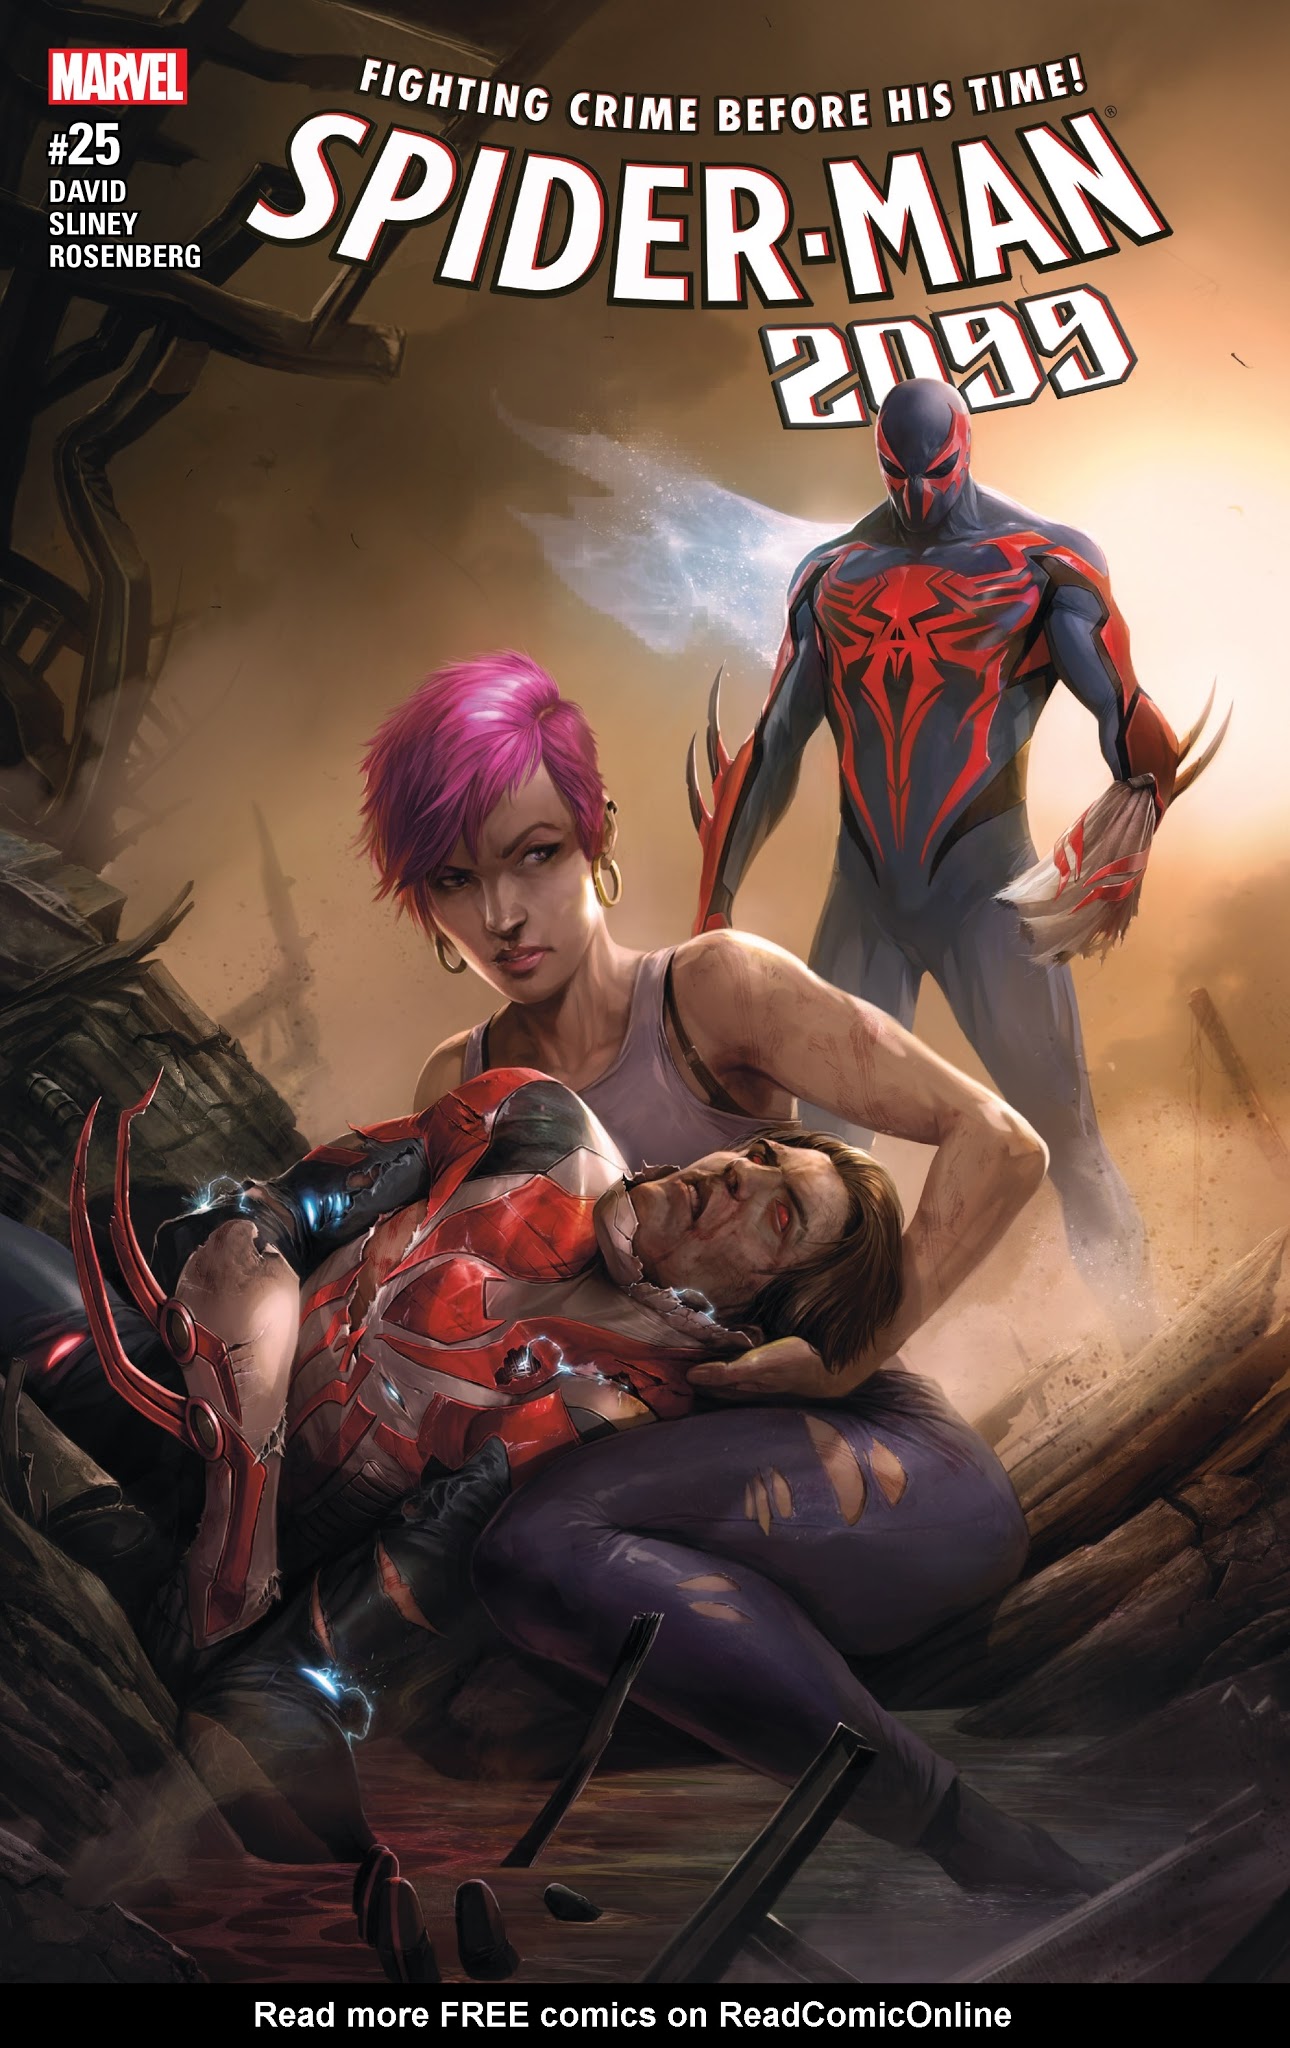 Spider Man 2099 2015 Issue 25 | Read Spider Man 2099 2015 Issue 25 comic  online in high quality. Read Full Comic online for free - Read comics  online in high quality .|viewcomiconline.com